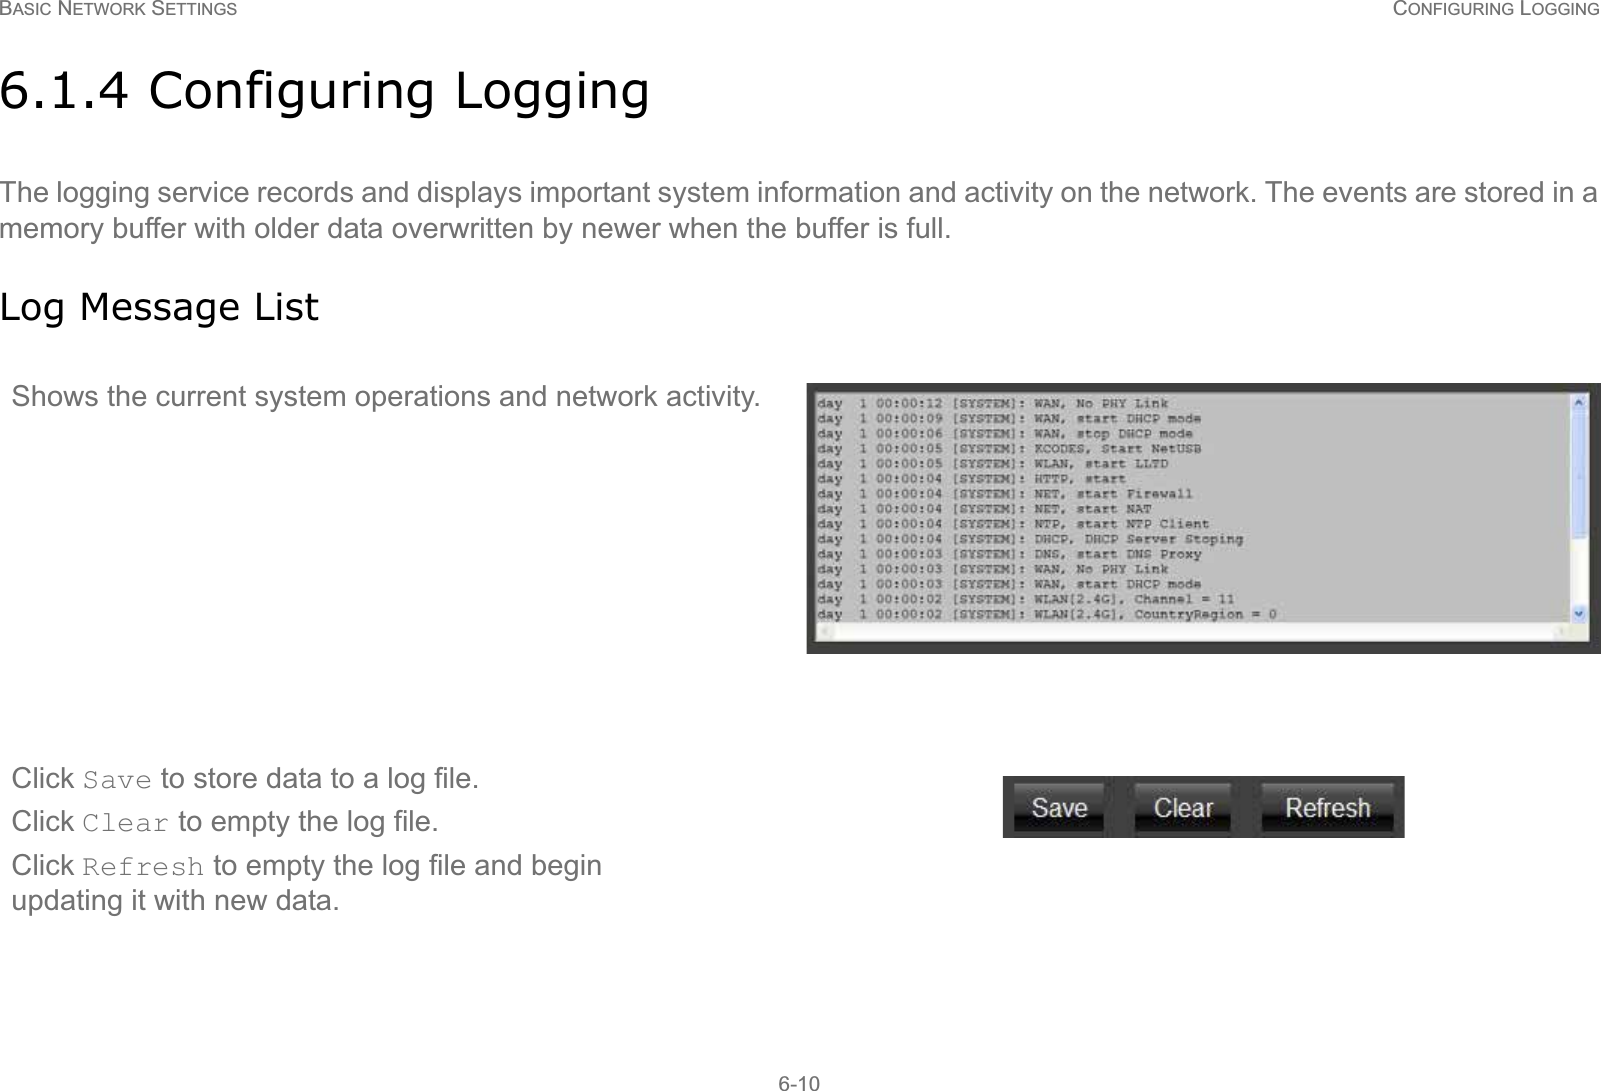 BASIC NETWORK SETTINGS CONFIGURING LOGGING6-106.1.4 Configuring LoggingThe logging service records and displays important system information and activity on the network. The events are stored in a memory buffer with older data overwritten by newer when the buffer is full.Log Message ListShows the current system operations and network activity.Click Save to store data to a log file.Click Clear to empty the log file. Click Refresh to empty the log file and begin updating it with new data.